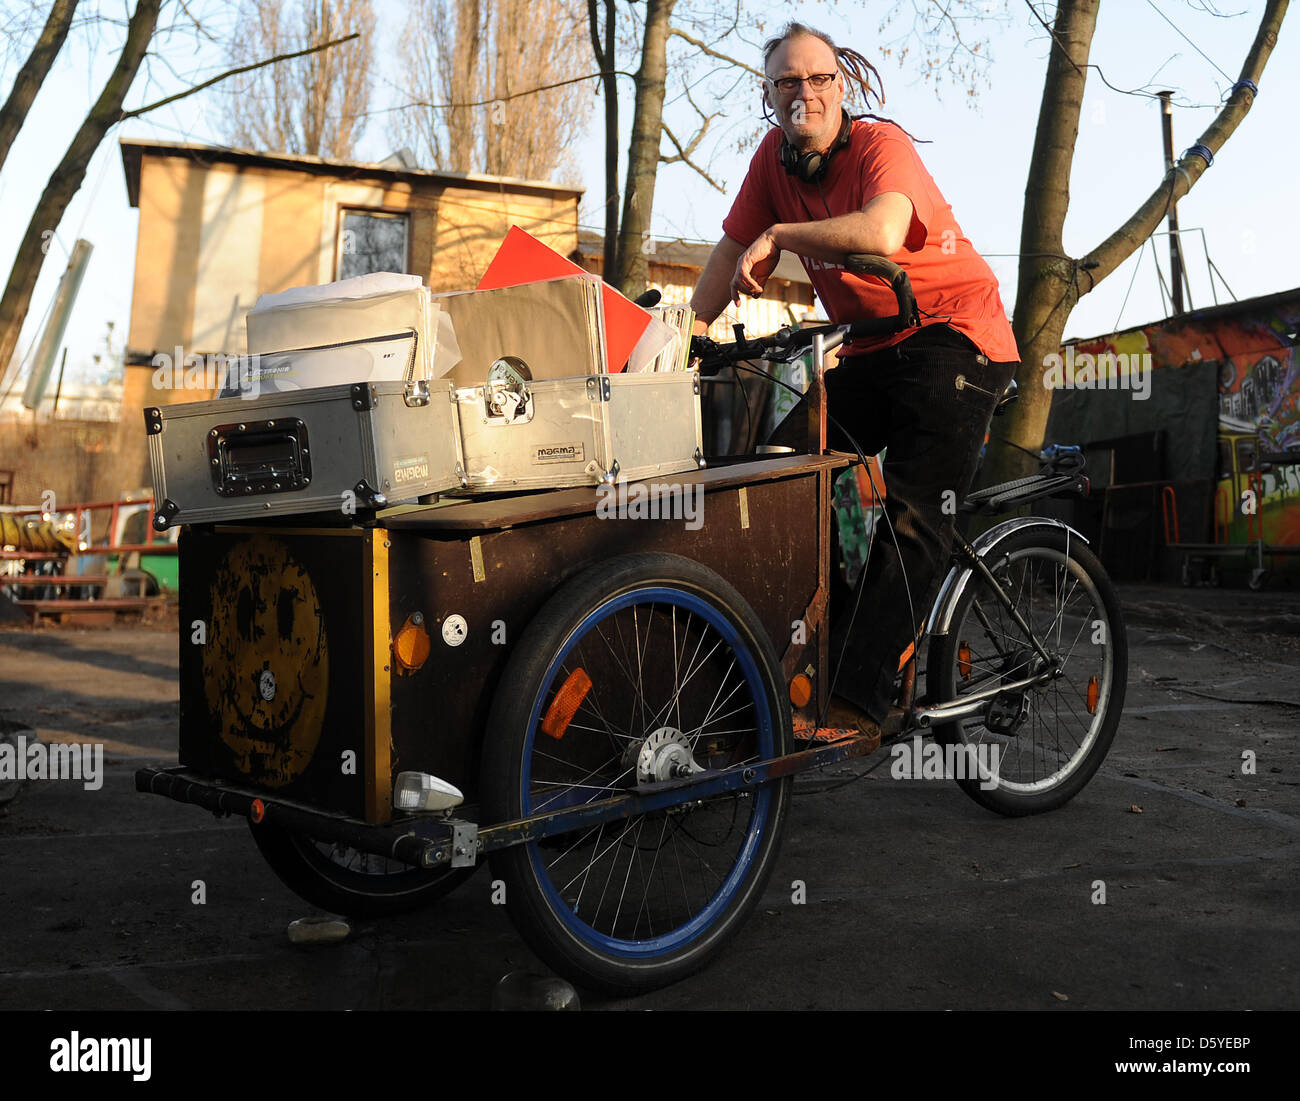 DJ Por No sits on a self-made cargo bike in Berlin, Germany, 16 March 2012. Berlin's techno heroes are growing older, some of the DJs of the first hour will reach retirement age soon. 47 year old DJ Por No, who is called Martin, came to Berlin from Australia at the end of the 90s. DJing alone does not earn a living for him, so he also works in a hostel. Photo: Britta Pedersen Stock Photo